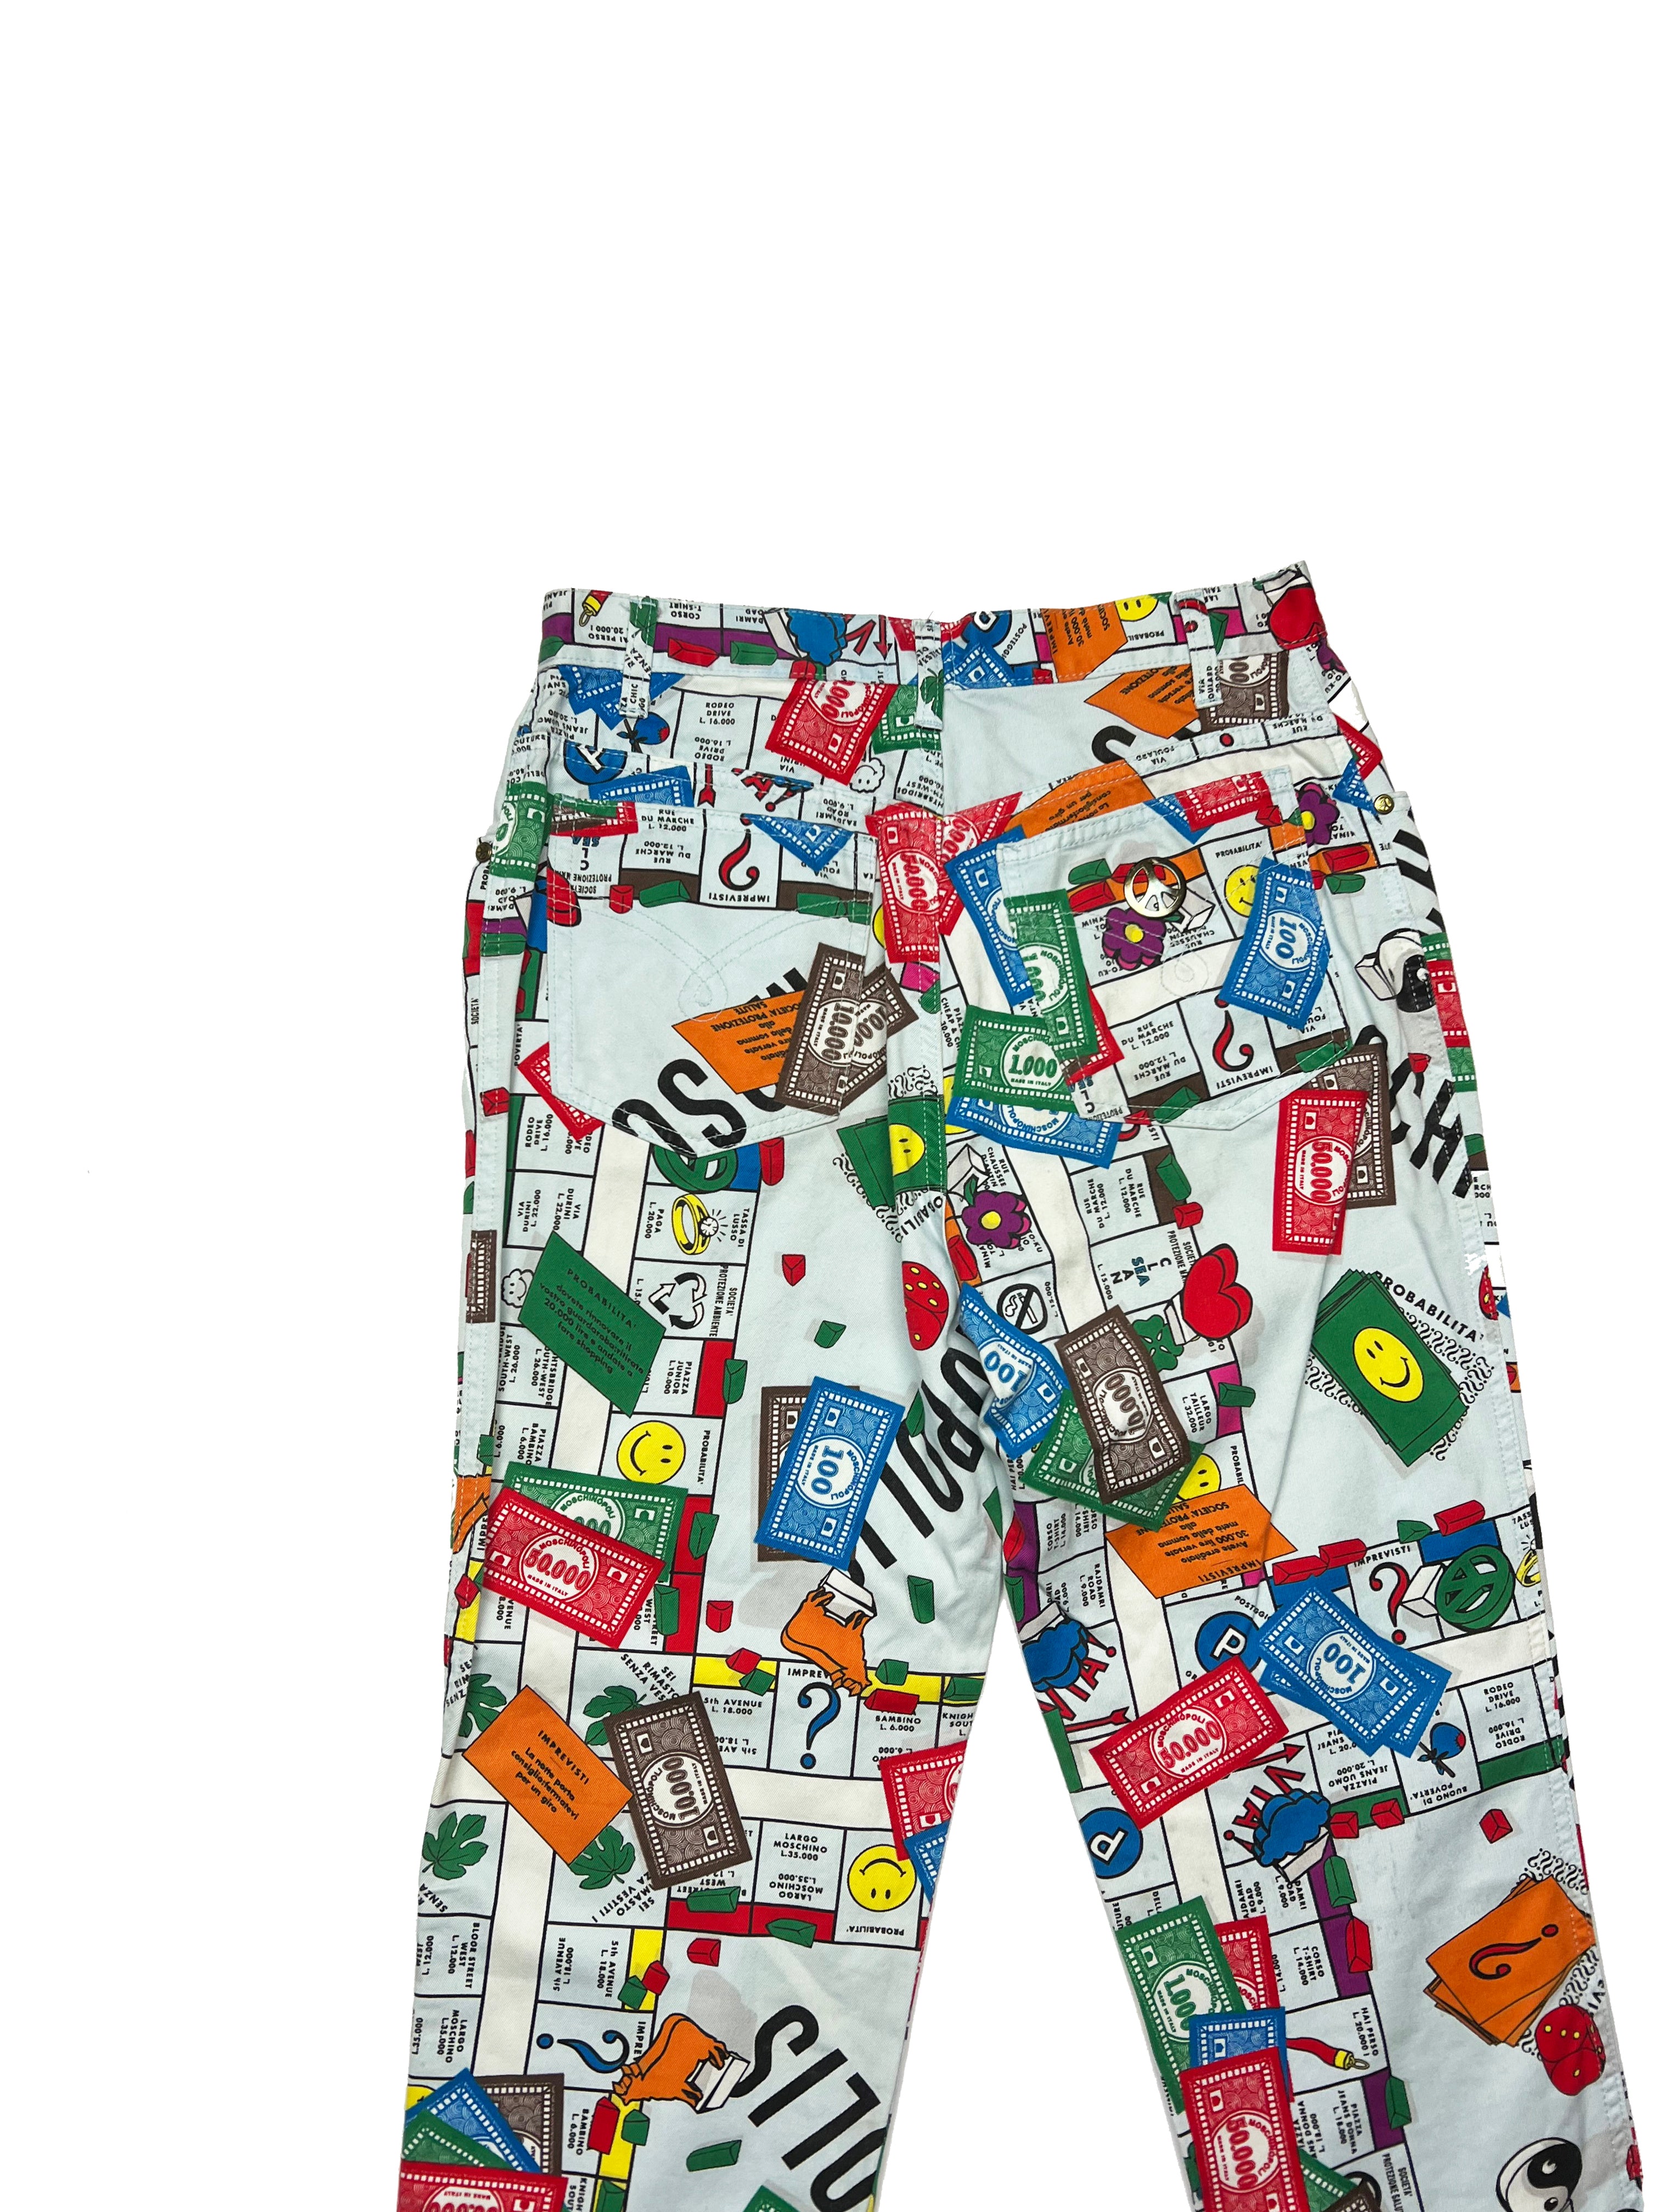 Moschino 'Monopoly' Trousers 90's